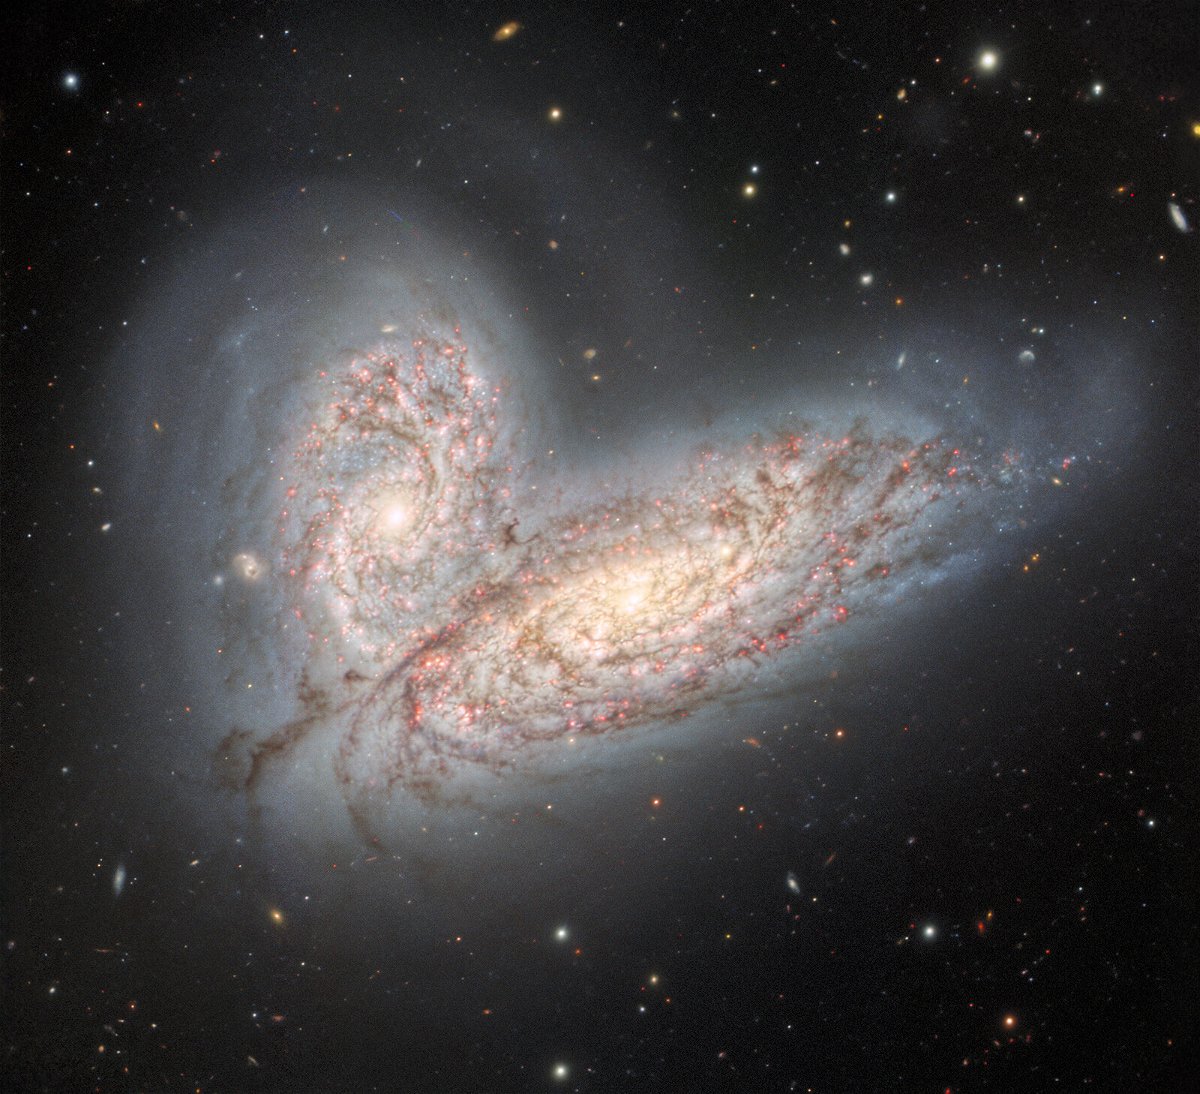 <i>International Gemini Observatory/NOIRLab/NSF/AURA</i><br/>This image from the Gemini North telescope in Hawaii reveals a pair of interacting spiral galaxies — NGC 4568 (bottom) and NGC 4567 (top) — as they begin to clash and merge. The galaxies will eventually form a single elliptical galaxy in around 500 million years.